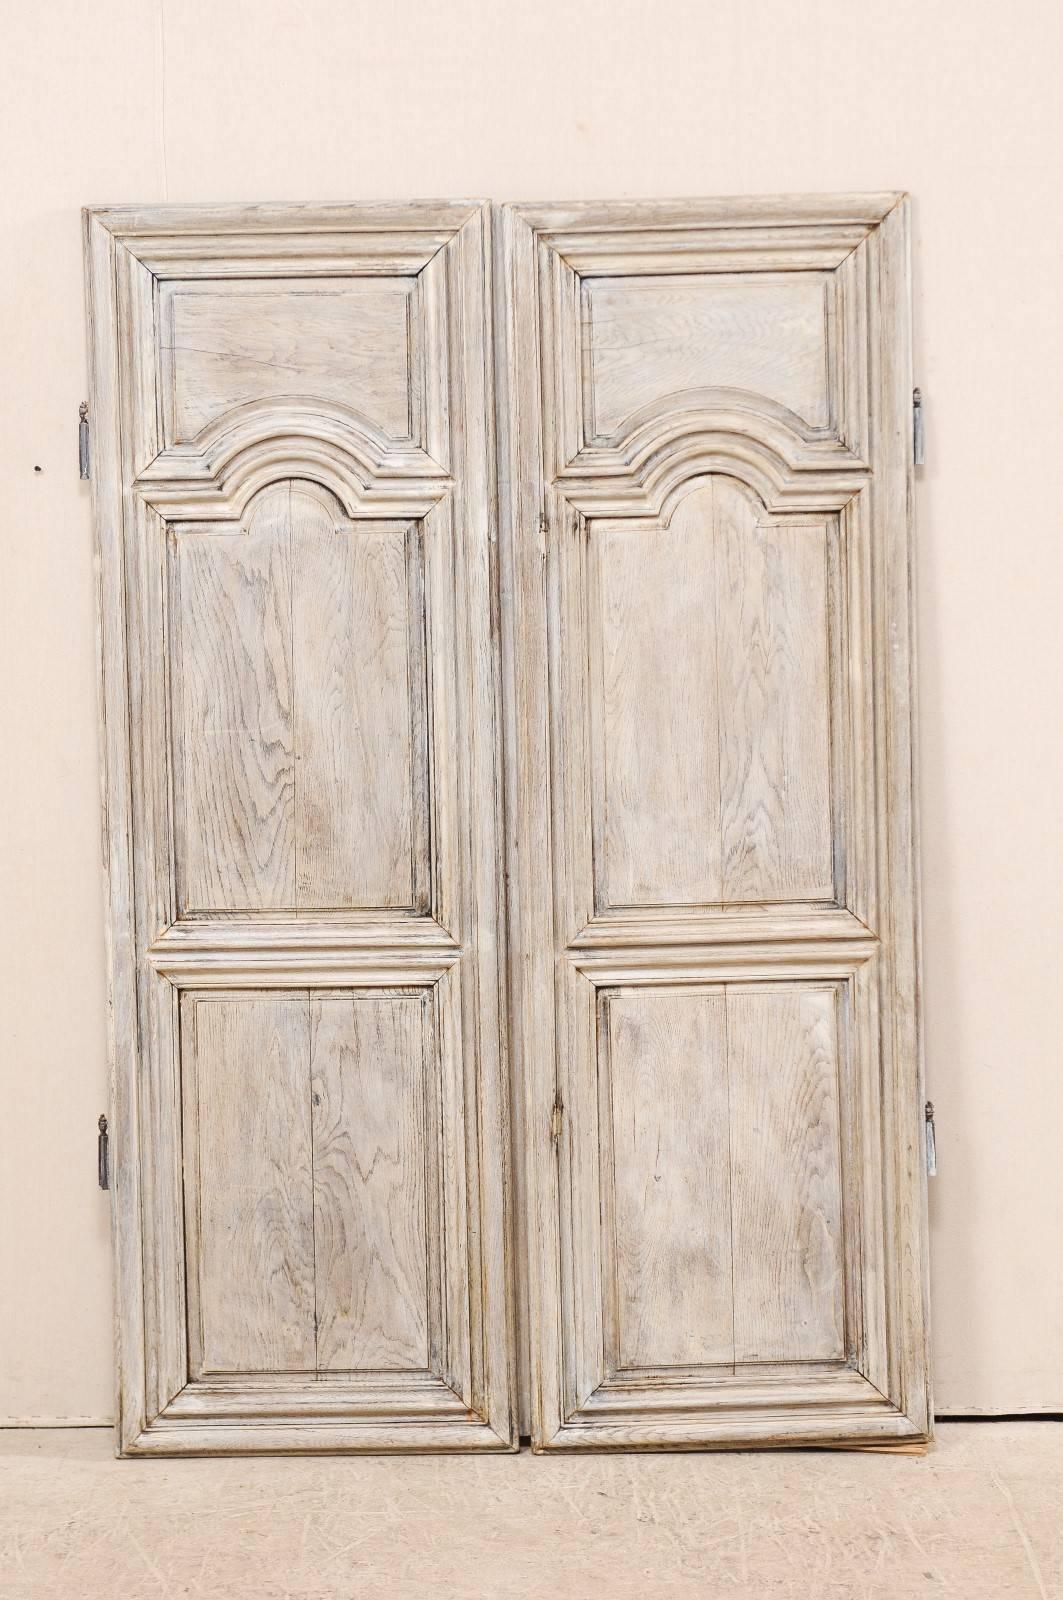 A pair of shorter-sized, 19th century, French doors. This cute pair of antique French doors have three raised panels on their fronts, with the upper and middle panels featuring convex and concave half-moon designs, which harmoniously fit together